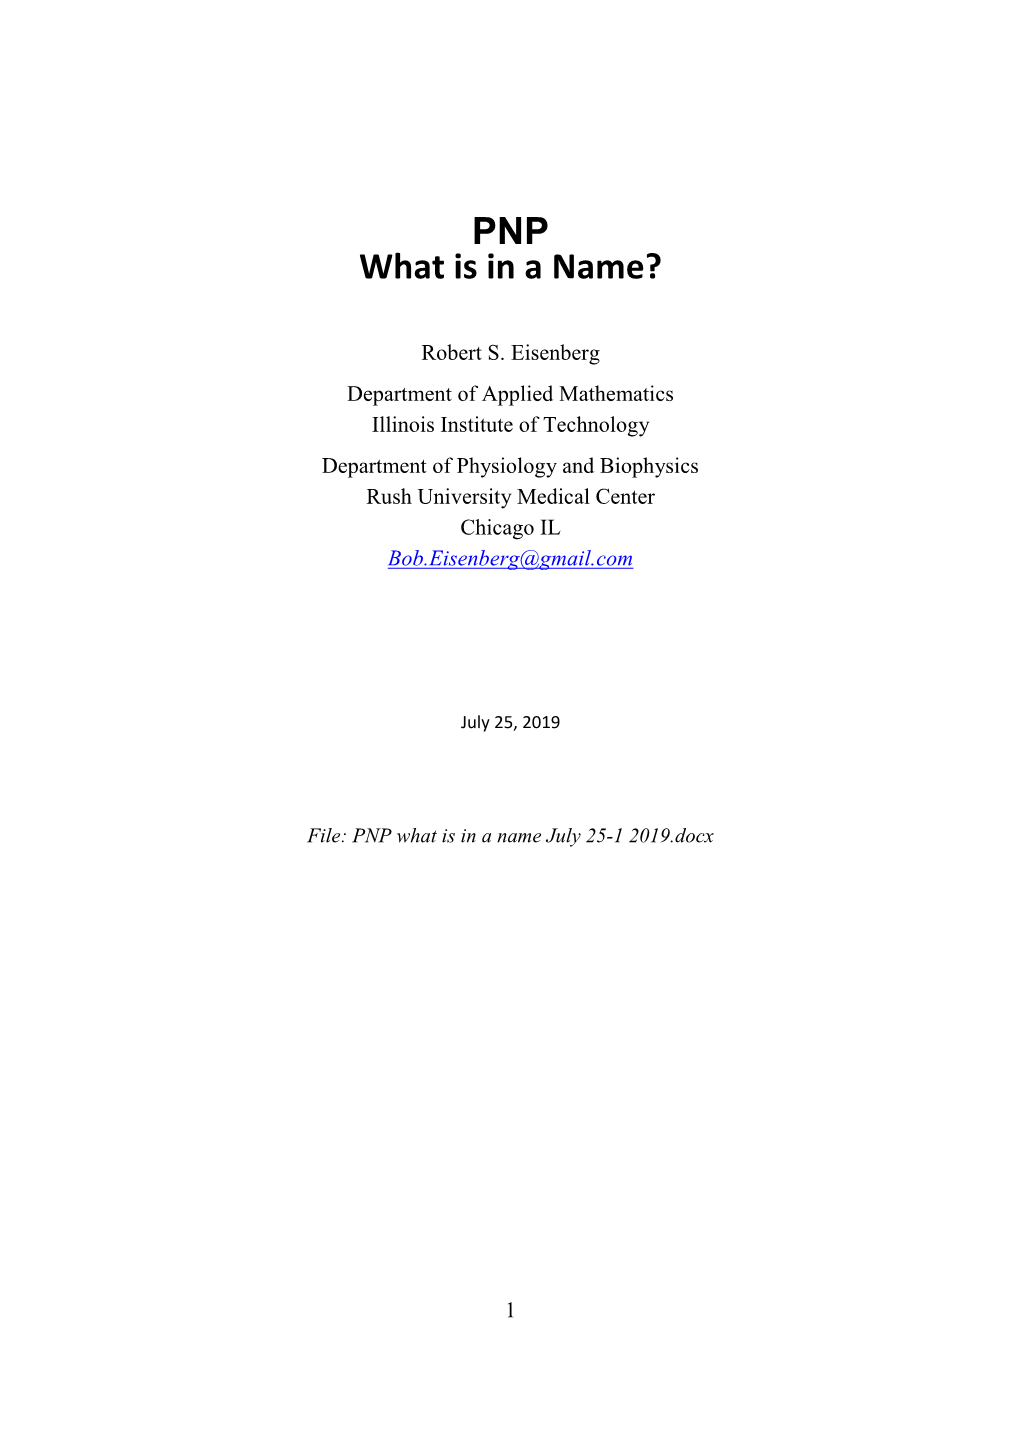 PNP What Is in a Name?